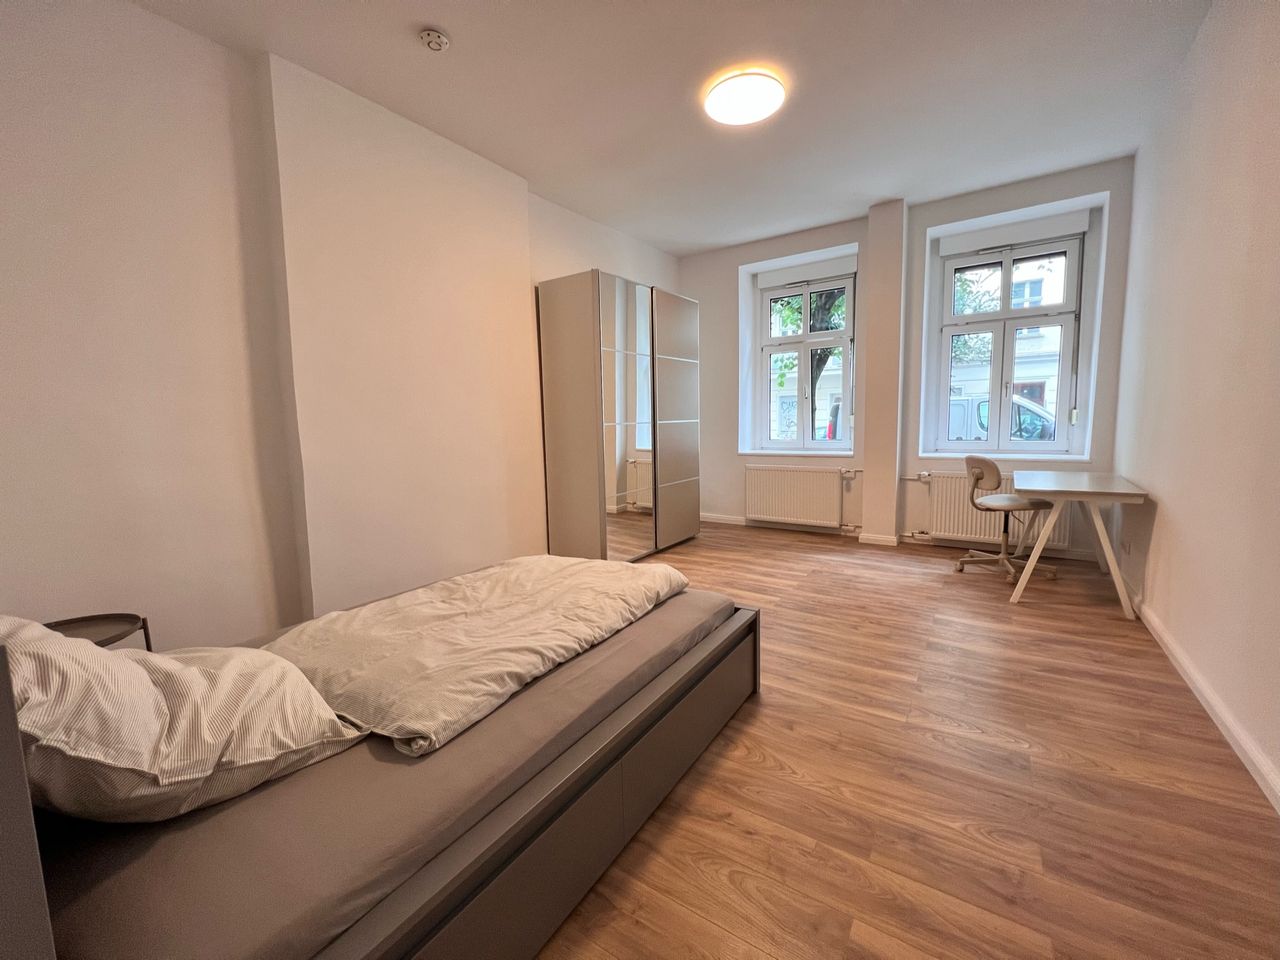 Freshly renovated 4 room flat in Friedrichshain with 2 bathrooms